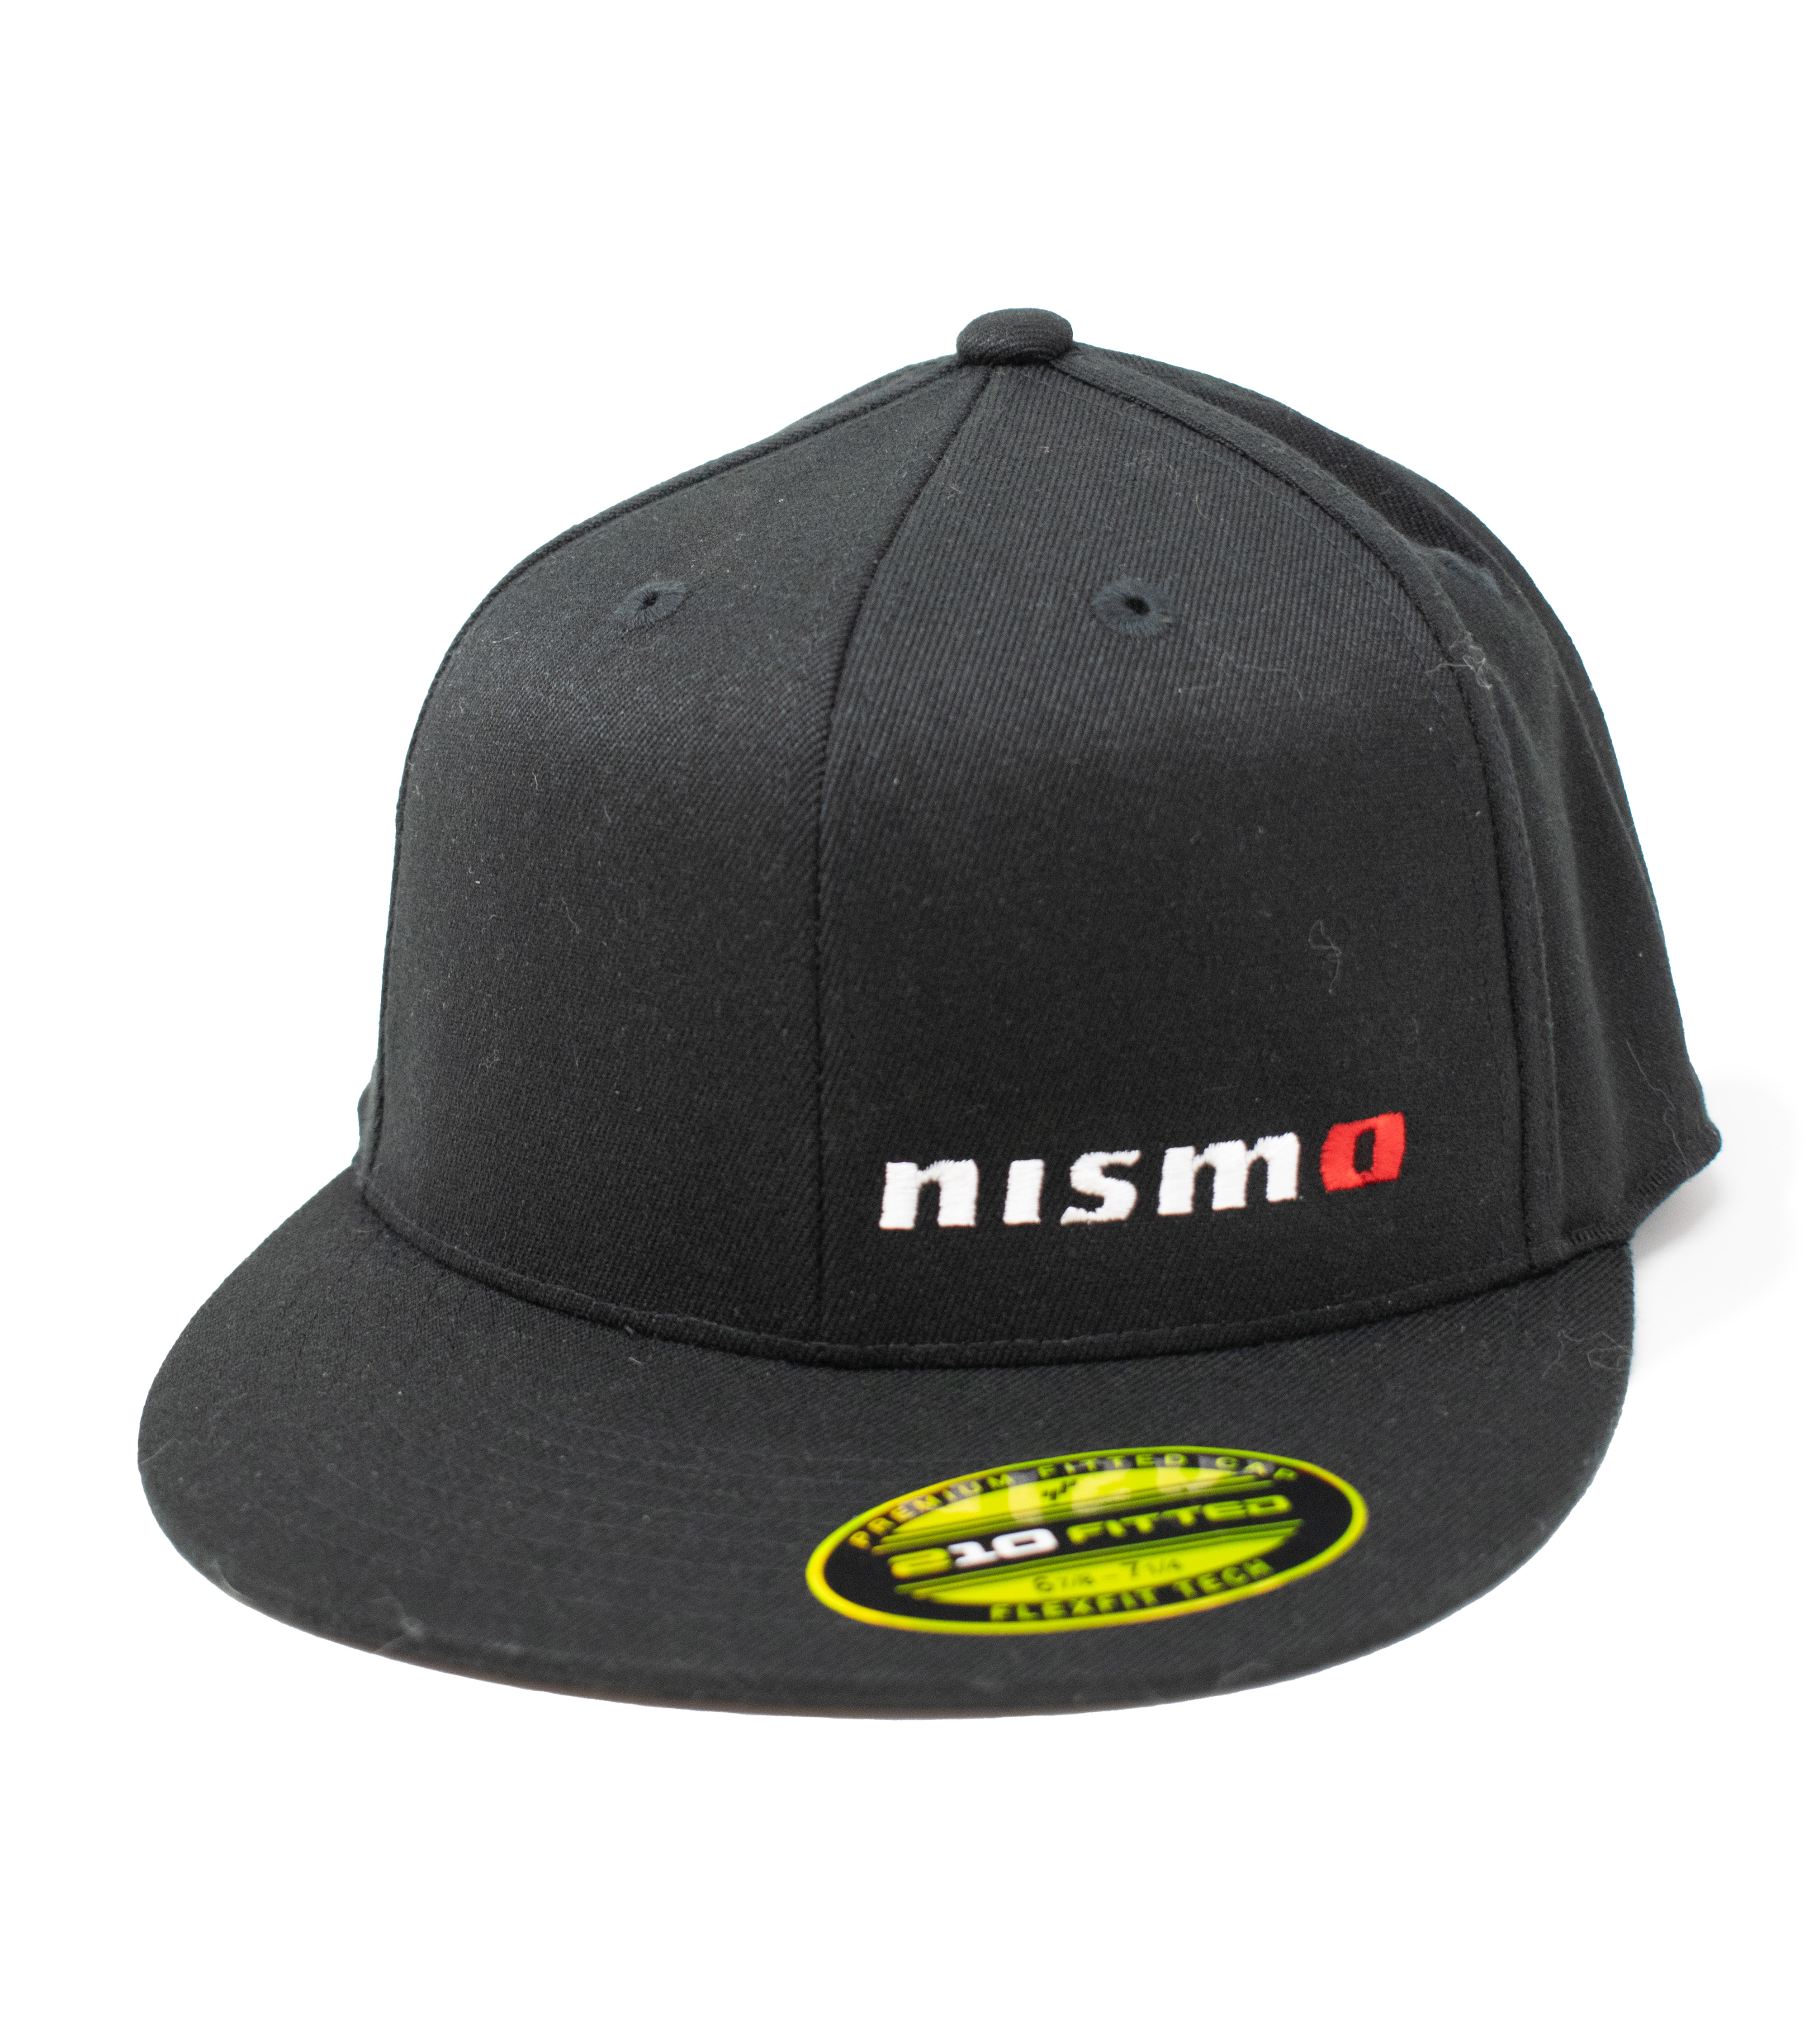 Image of Men's NISMO Fitted Cap